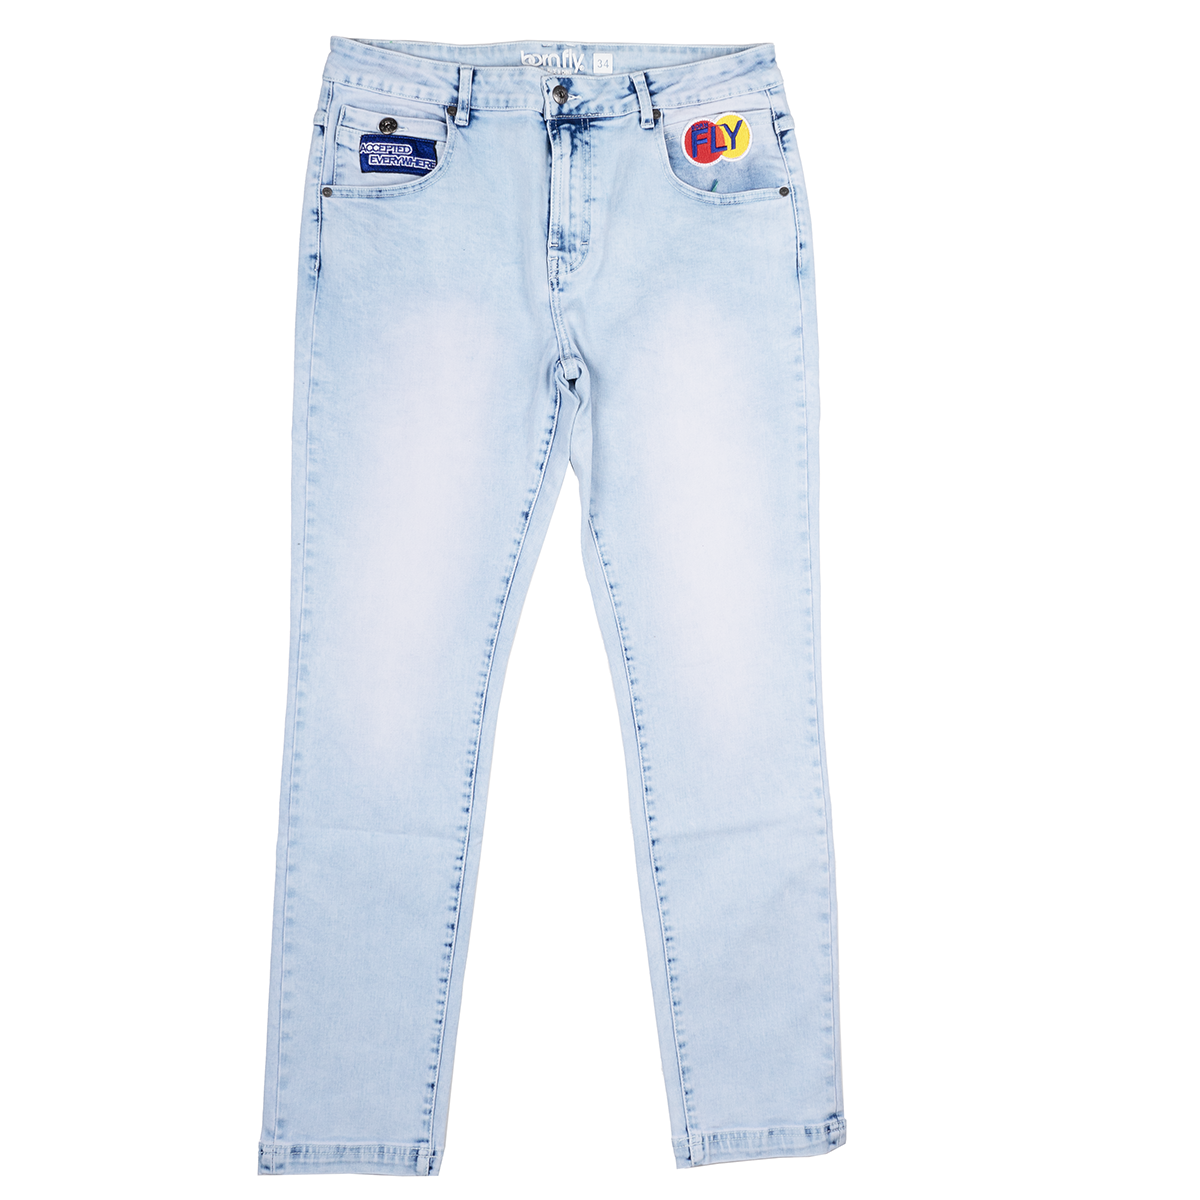 BORN FLY JEANS LT STONE WASH 2303D4617